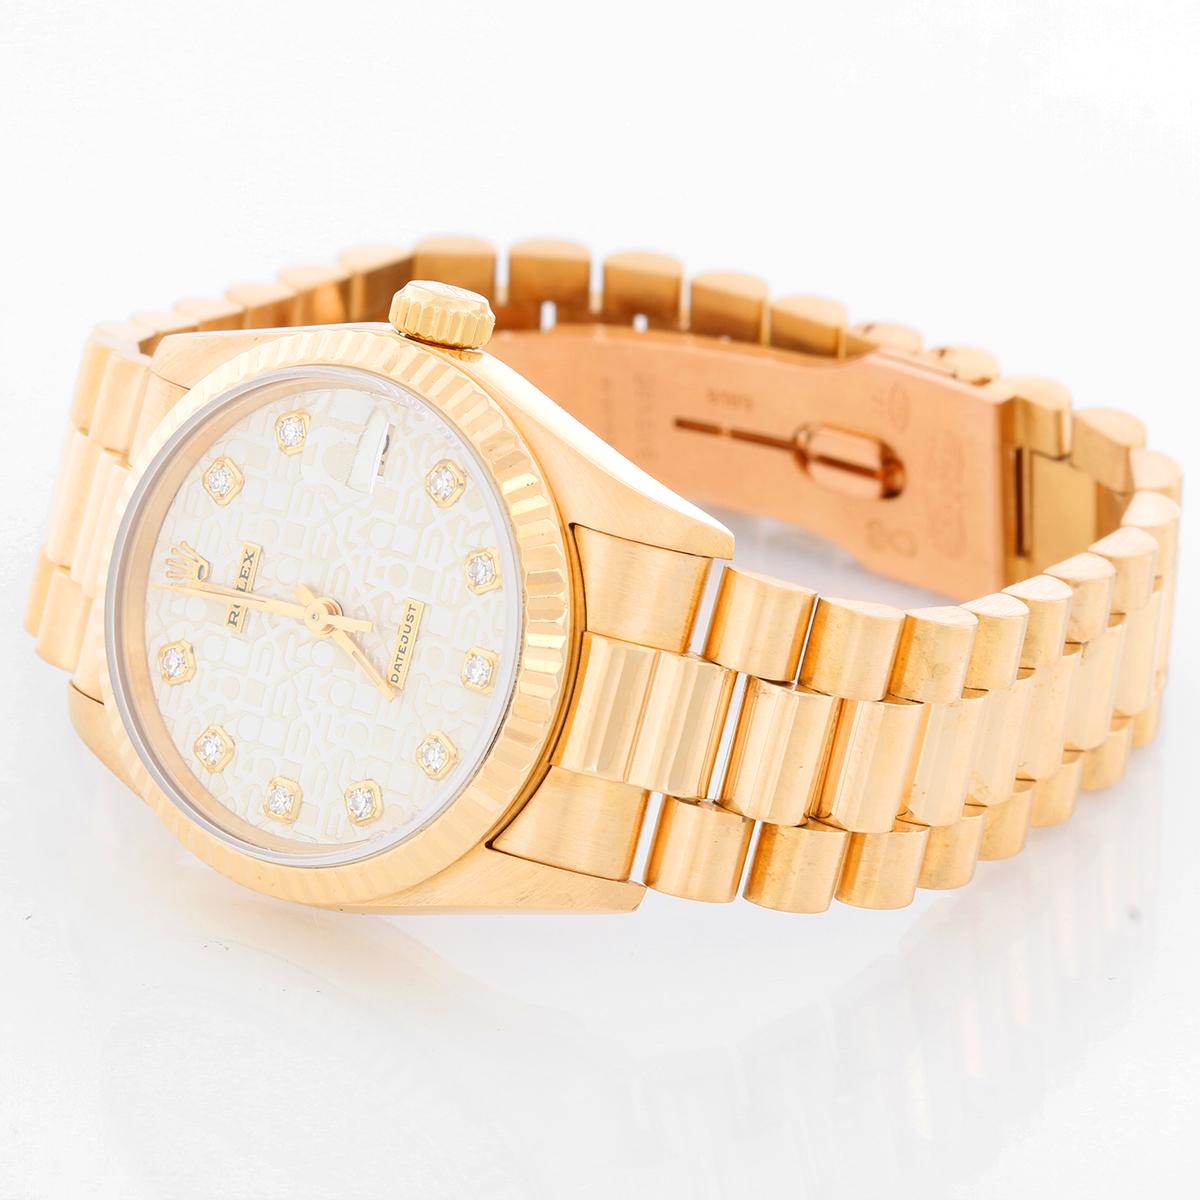 Rolex 18K Yellow Gold President Midsize Watch 68278 - Automatic. 18K yellow gold case with custom diamond bezel ( 31 mm ). Factory Silver Jubilee diamond dial. 18k yellow gold Rolex hidden-clasp President bracelet. Pre-owned with Rolex box and books.